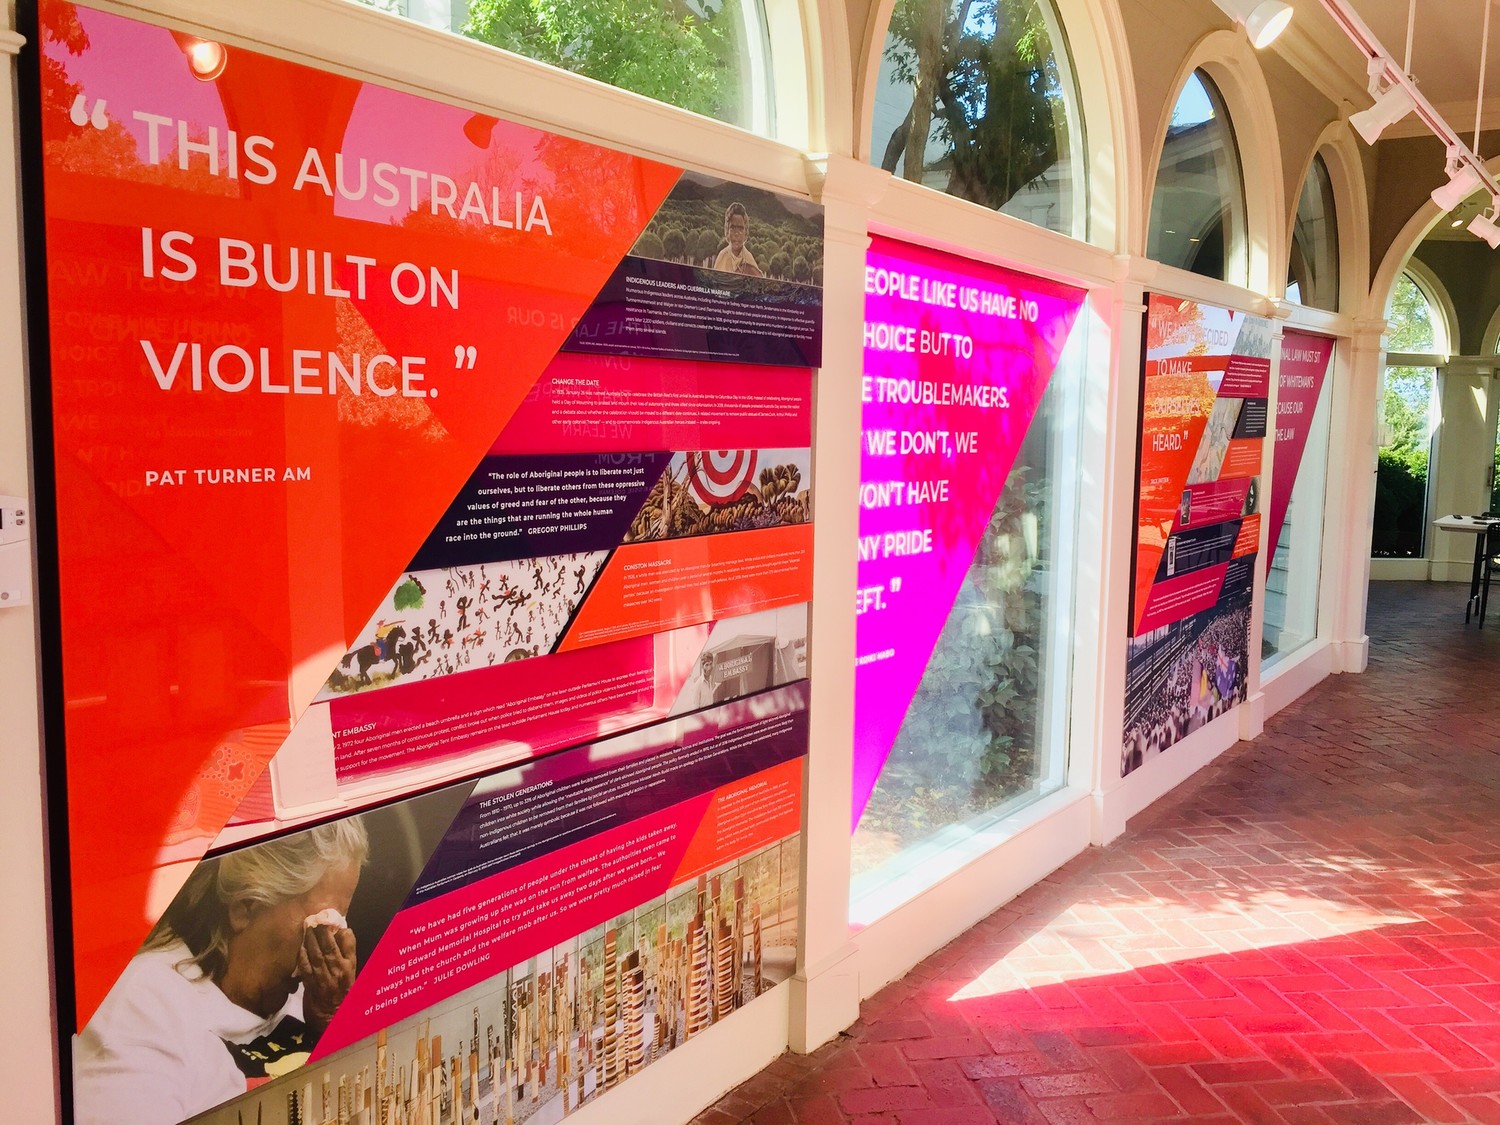 Thanks in part to the UVA Arts Council, in an exhibition exploring Indigenous Australian history and civil rights, panels were installed to addresses the history of violence toward Aboriginal people and the ways they have experienced, remembered, and resisted it.